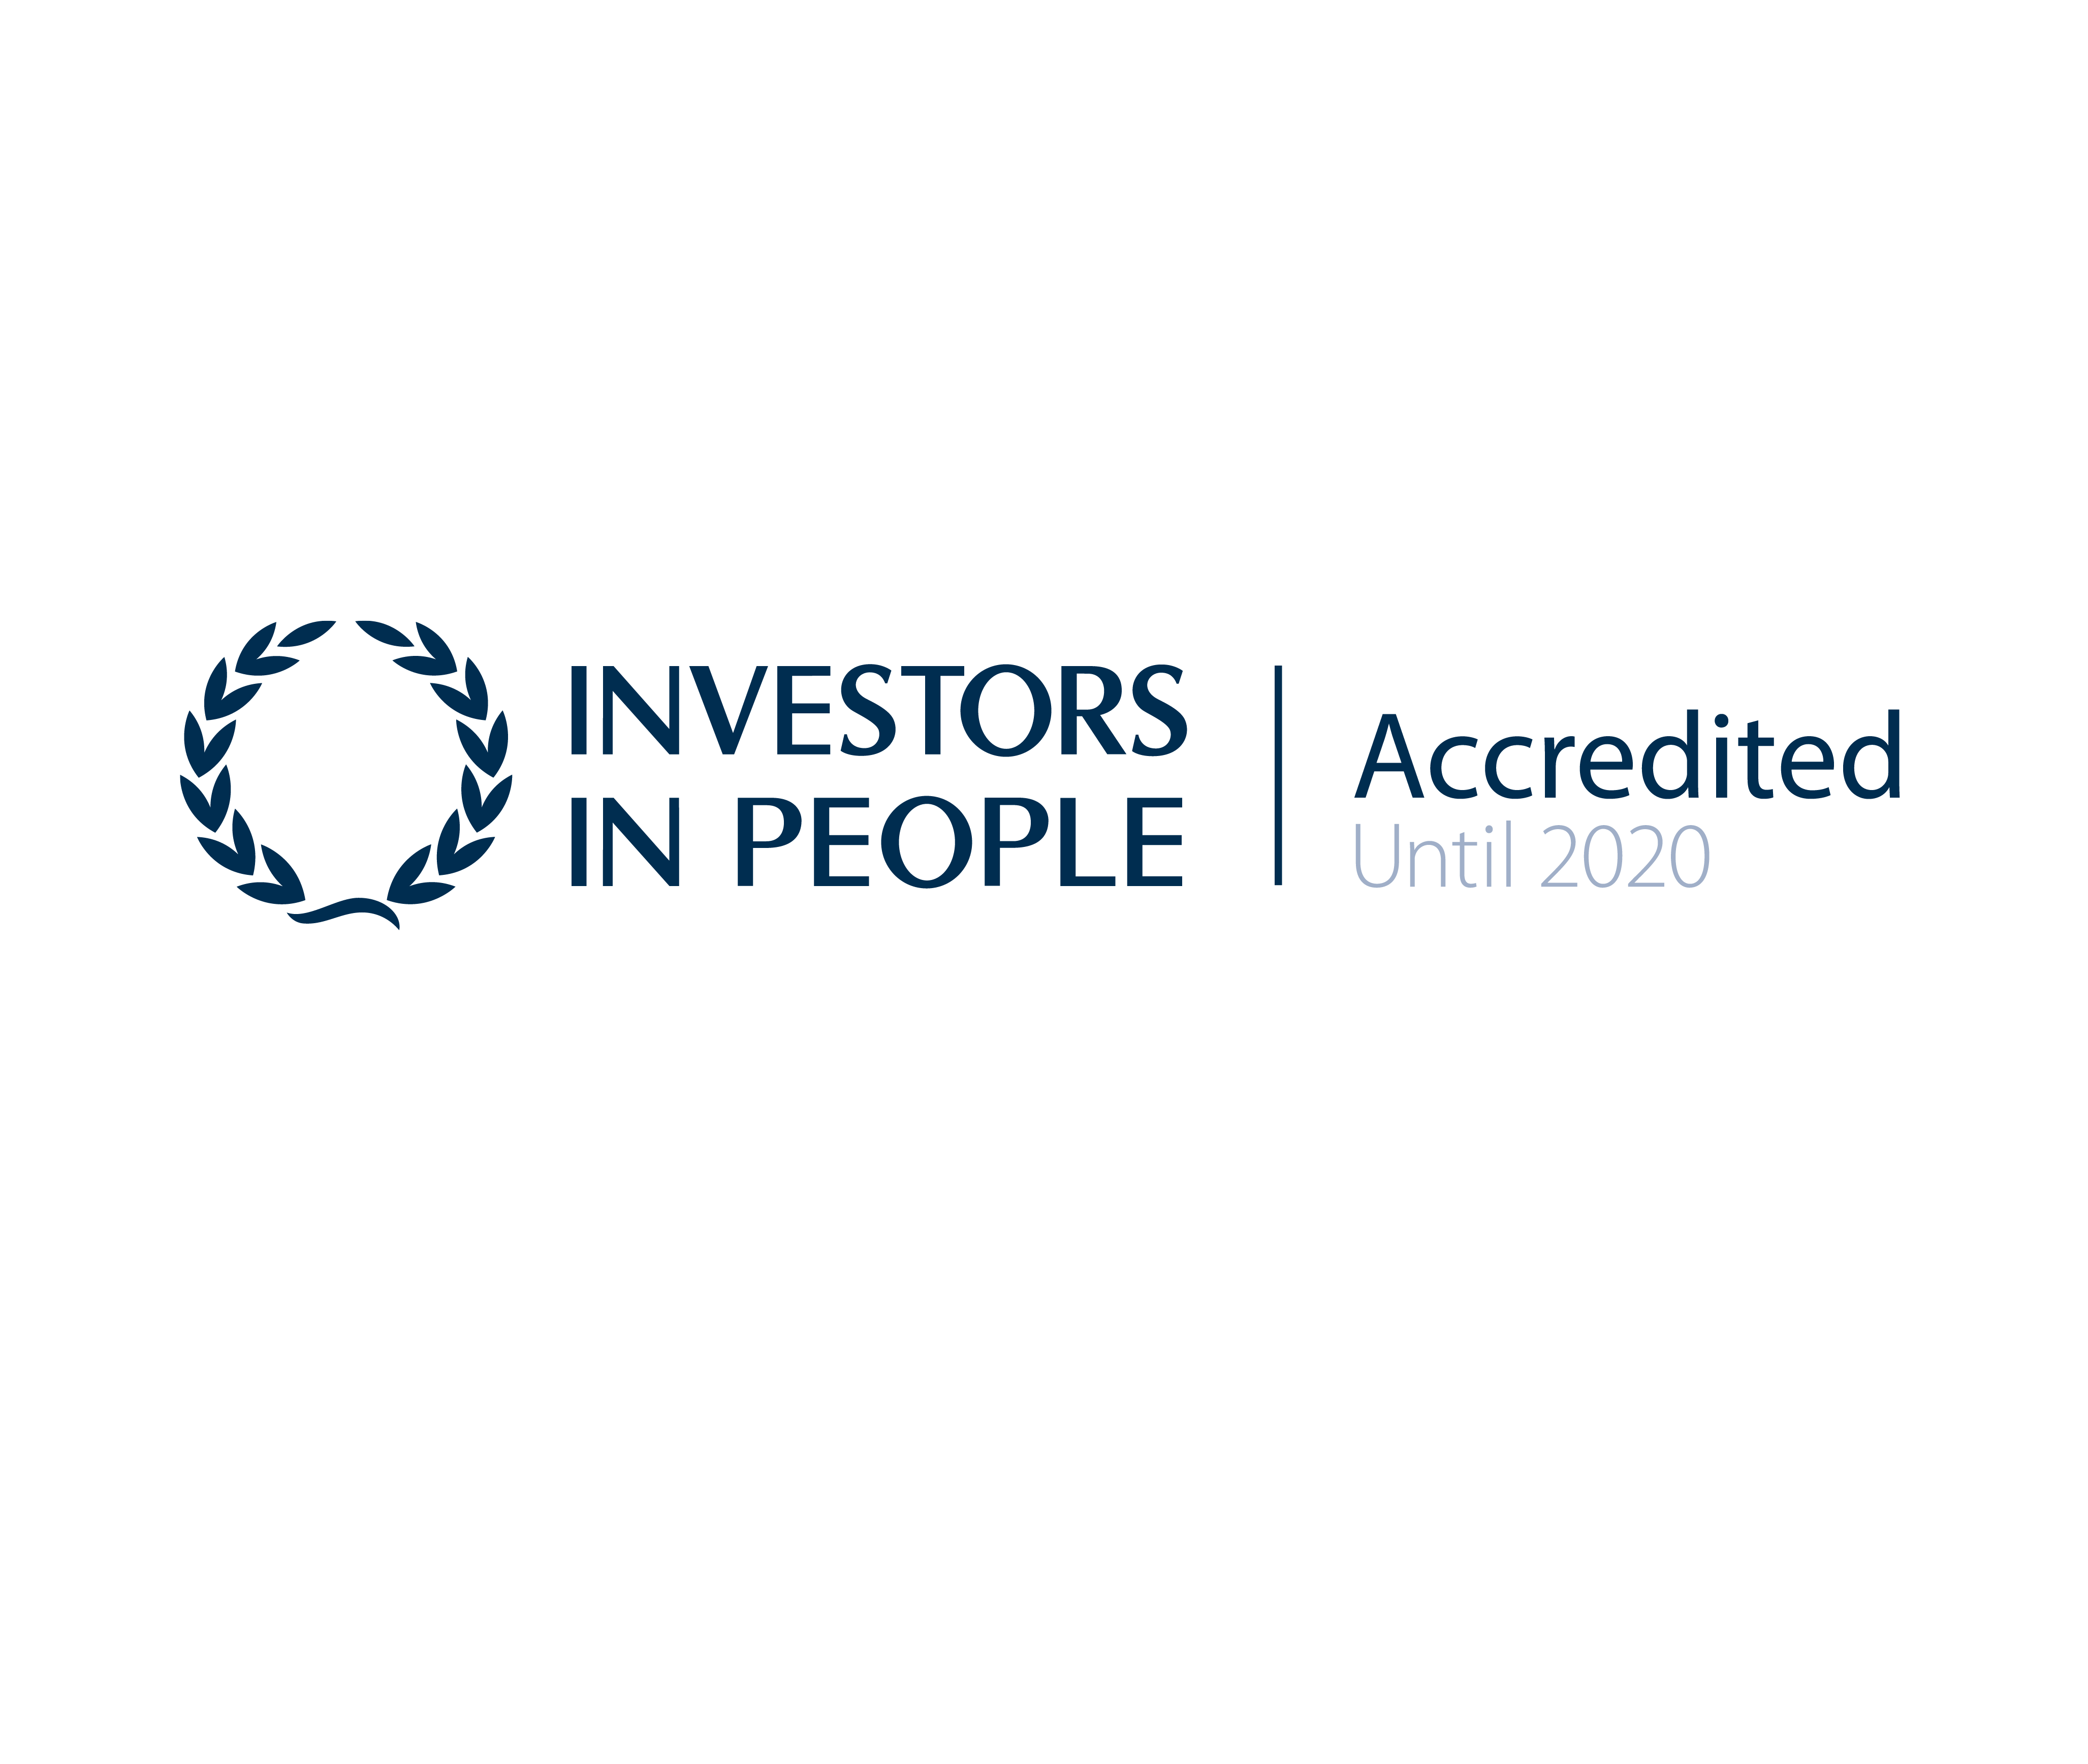 Investors in People Accredited until 2020